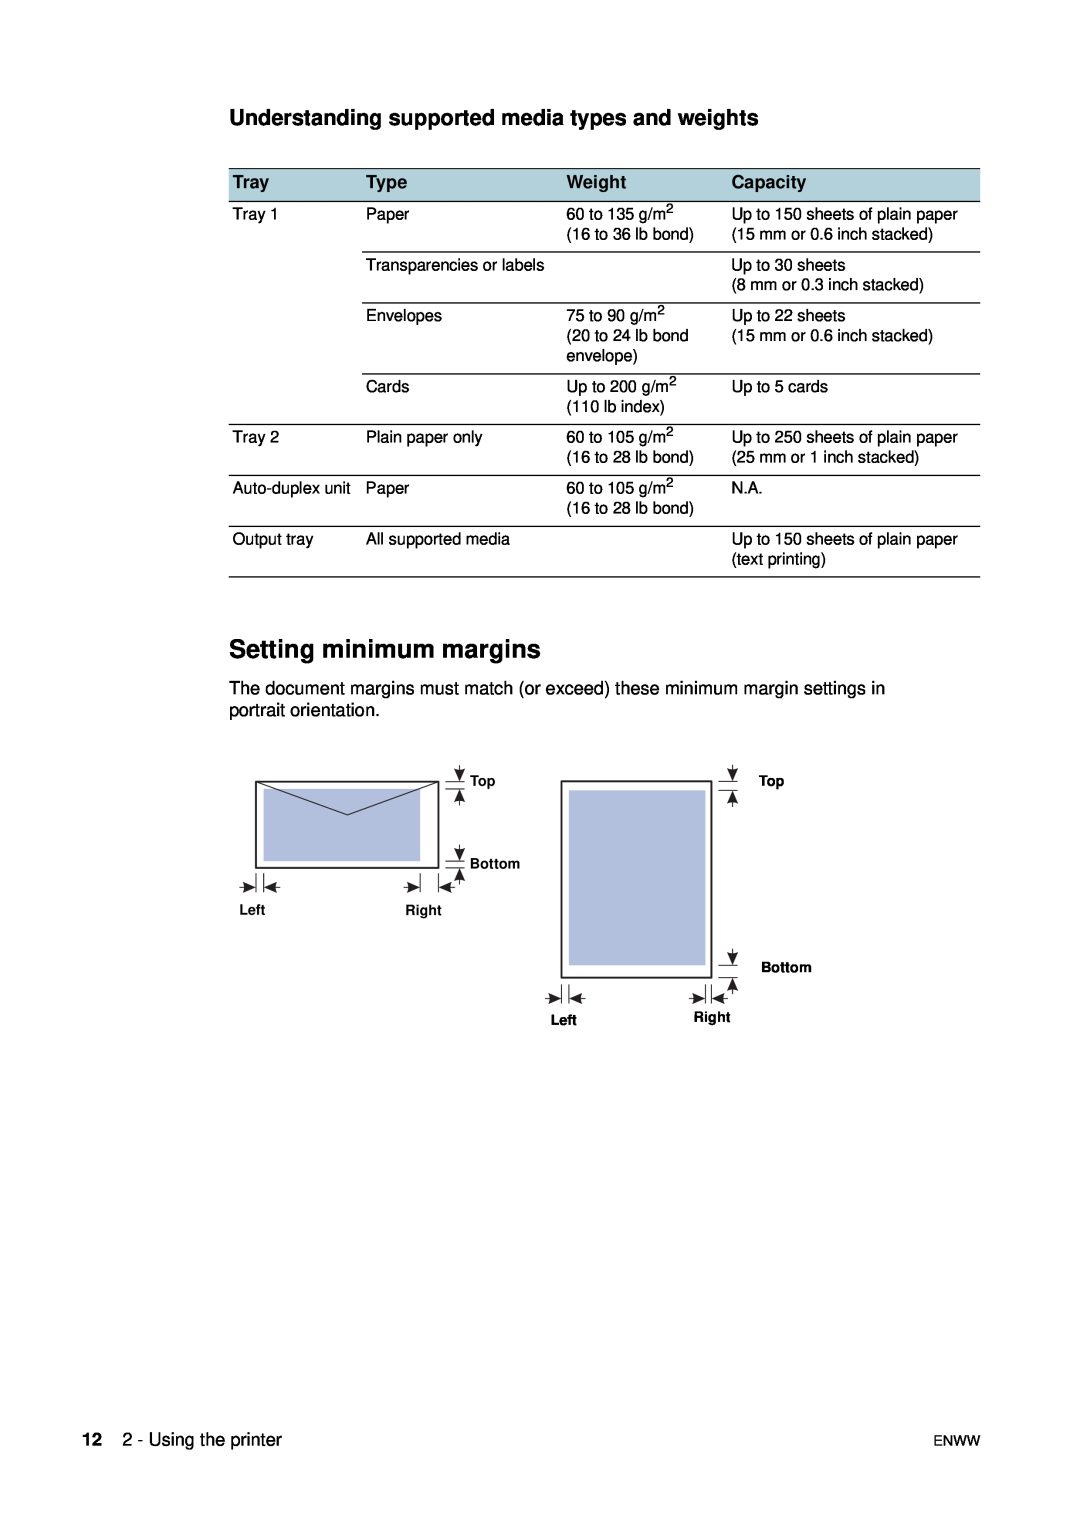 HP 1200 manual Setting minimum margins, Understanding supported media types and weights, Type, Weight, Capacity, Tray 